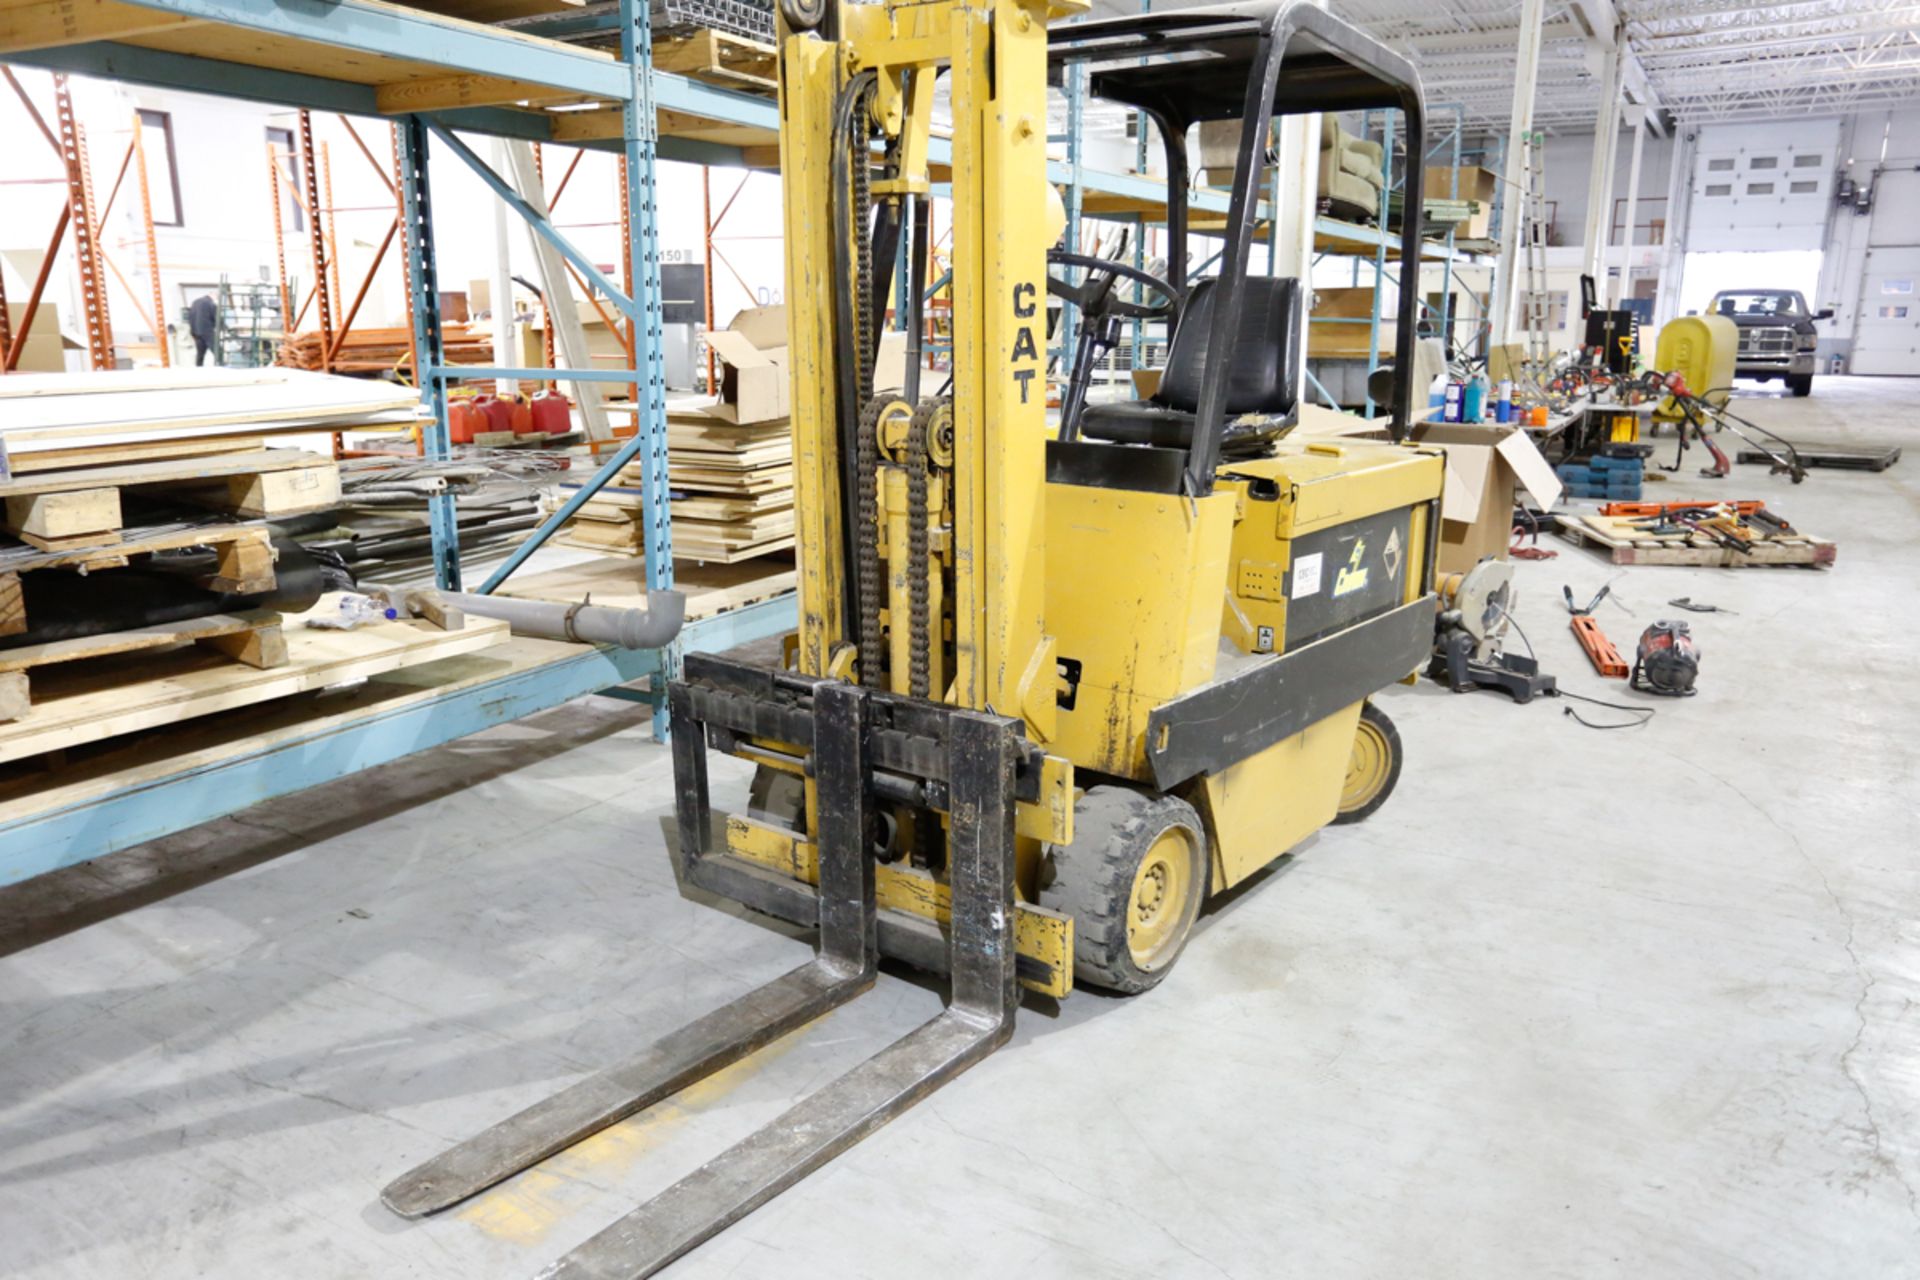 CATERPILLAR ELECTRIC FORKLIFT MOD MC60B, 6350 LBS CAP., 124" LIFT HEIGHT, 2-STAGE, SIDESHIFT, 7420 - Image 2 of 4